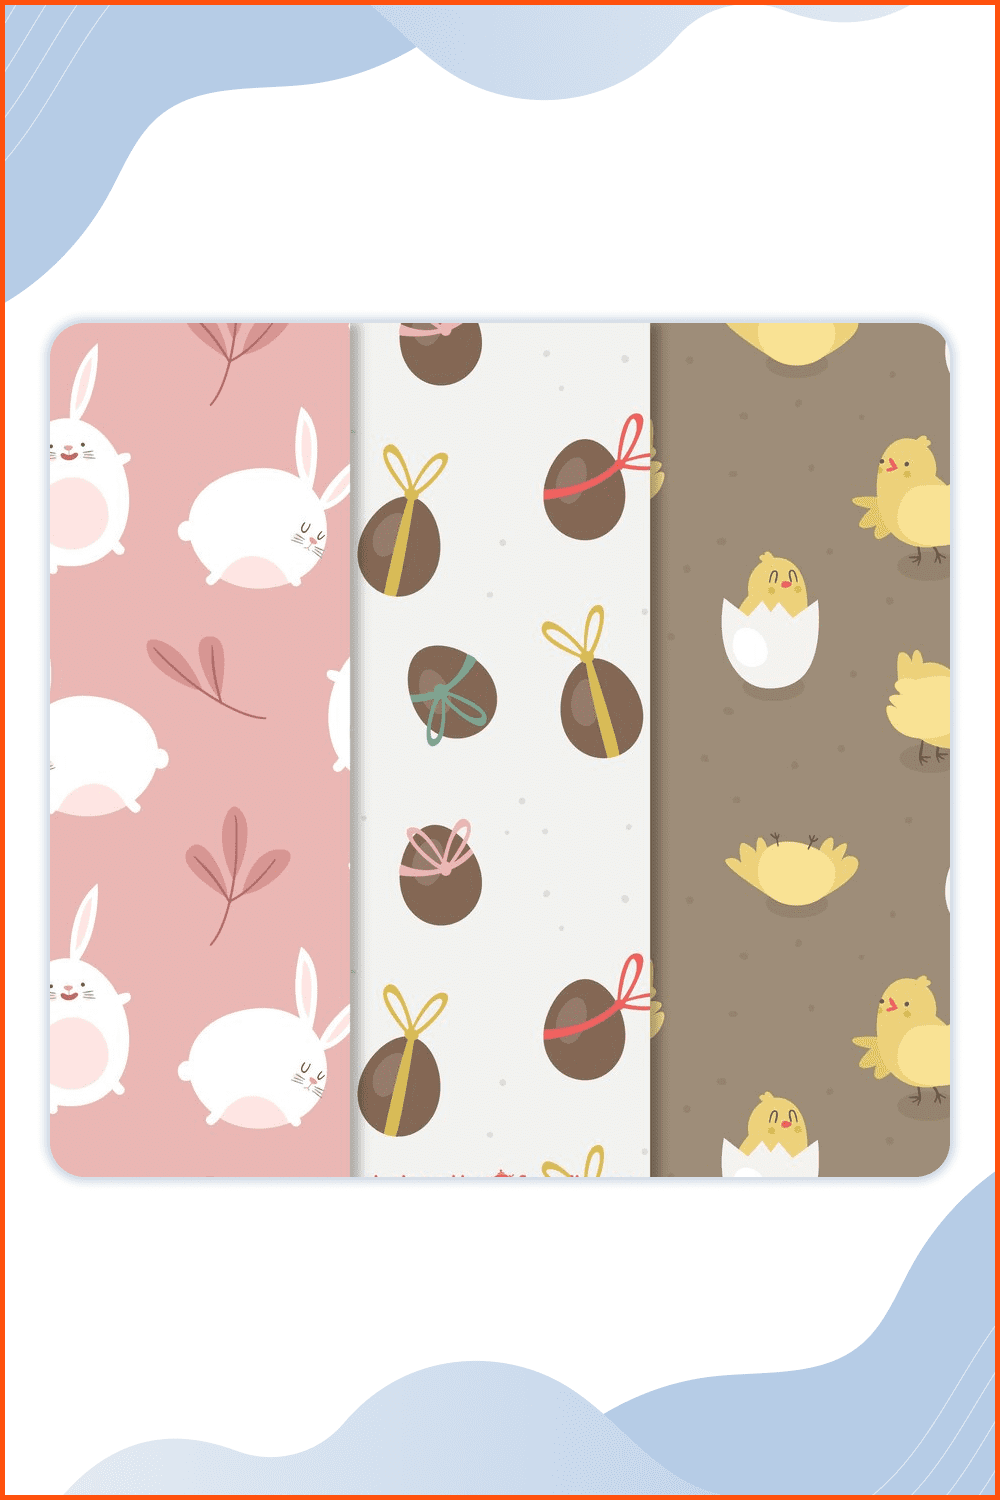 Collection nice easter patterns flat design.